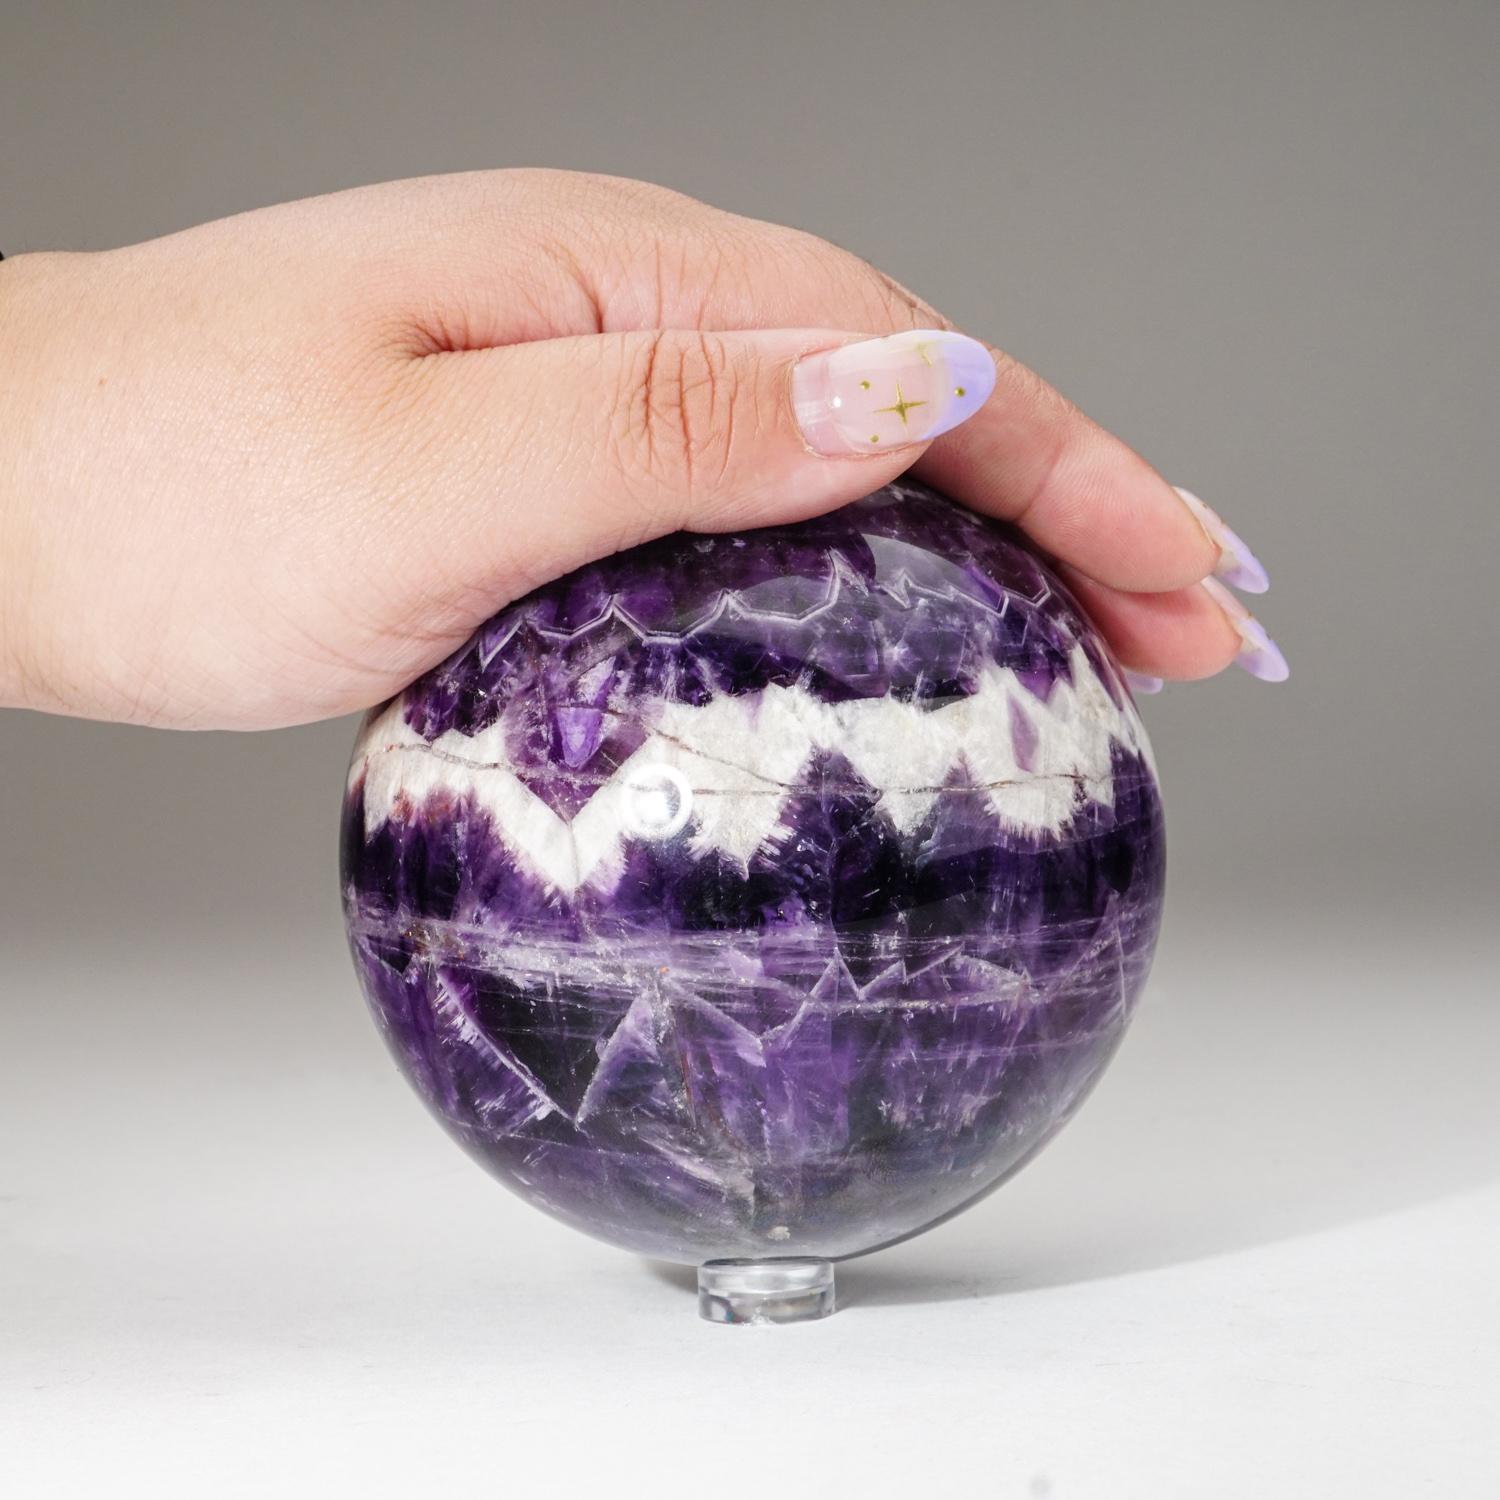 Top quality polished chevron amethyst sphere with vivid purple color and translucent to transparent clarity. Chevron Amethyst is a combination of Amethyst and White Quartz, mixed together in a V-striped or banded pattern. Chevron Amethyst combines